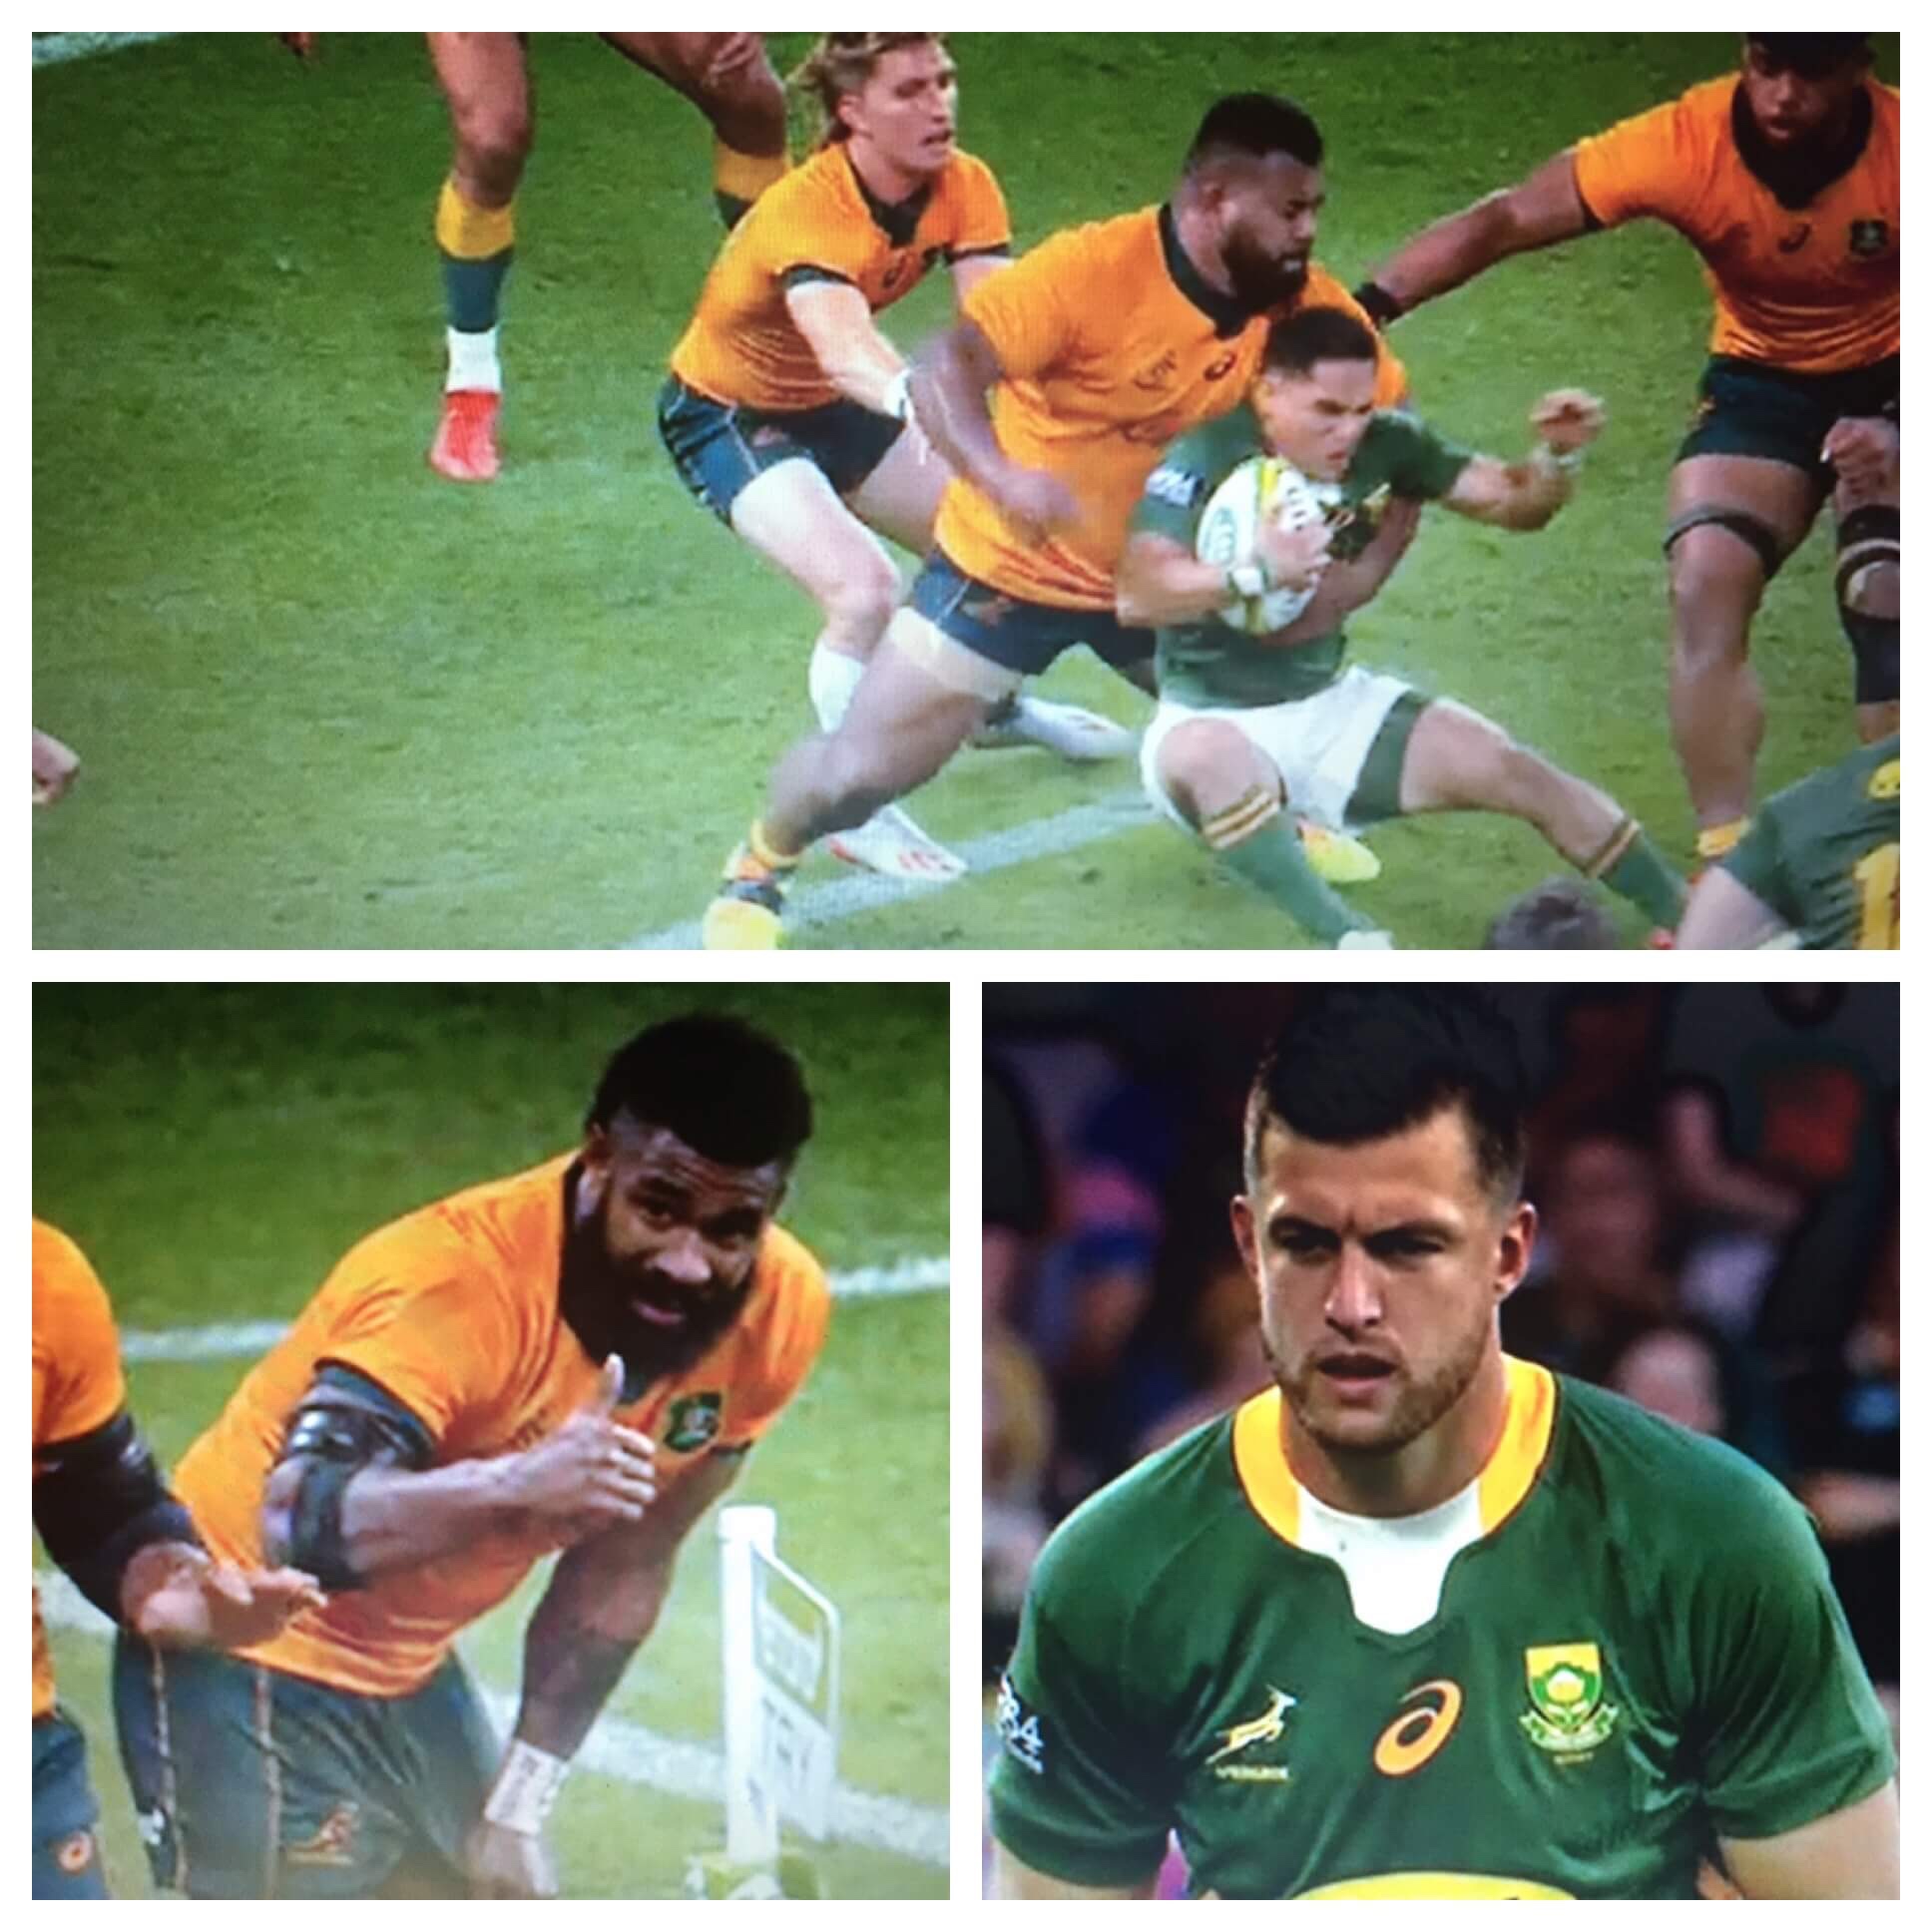 Rugby News Australia, Top 3 players in the 2021 Rugby Championship: Wallabies v Springboks